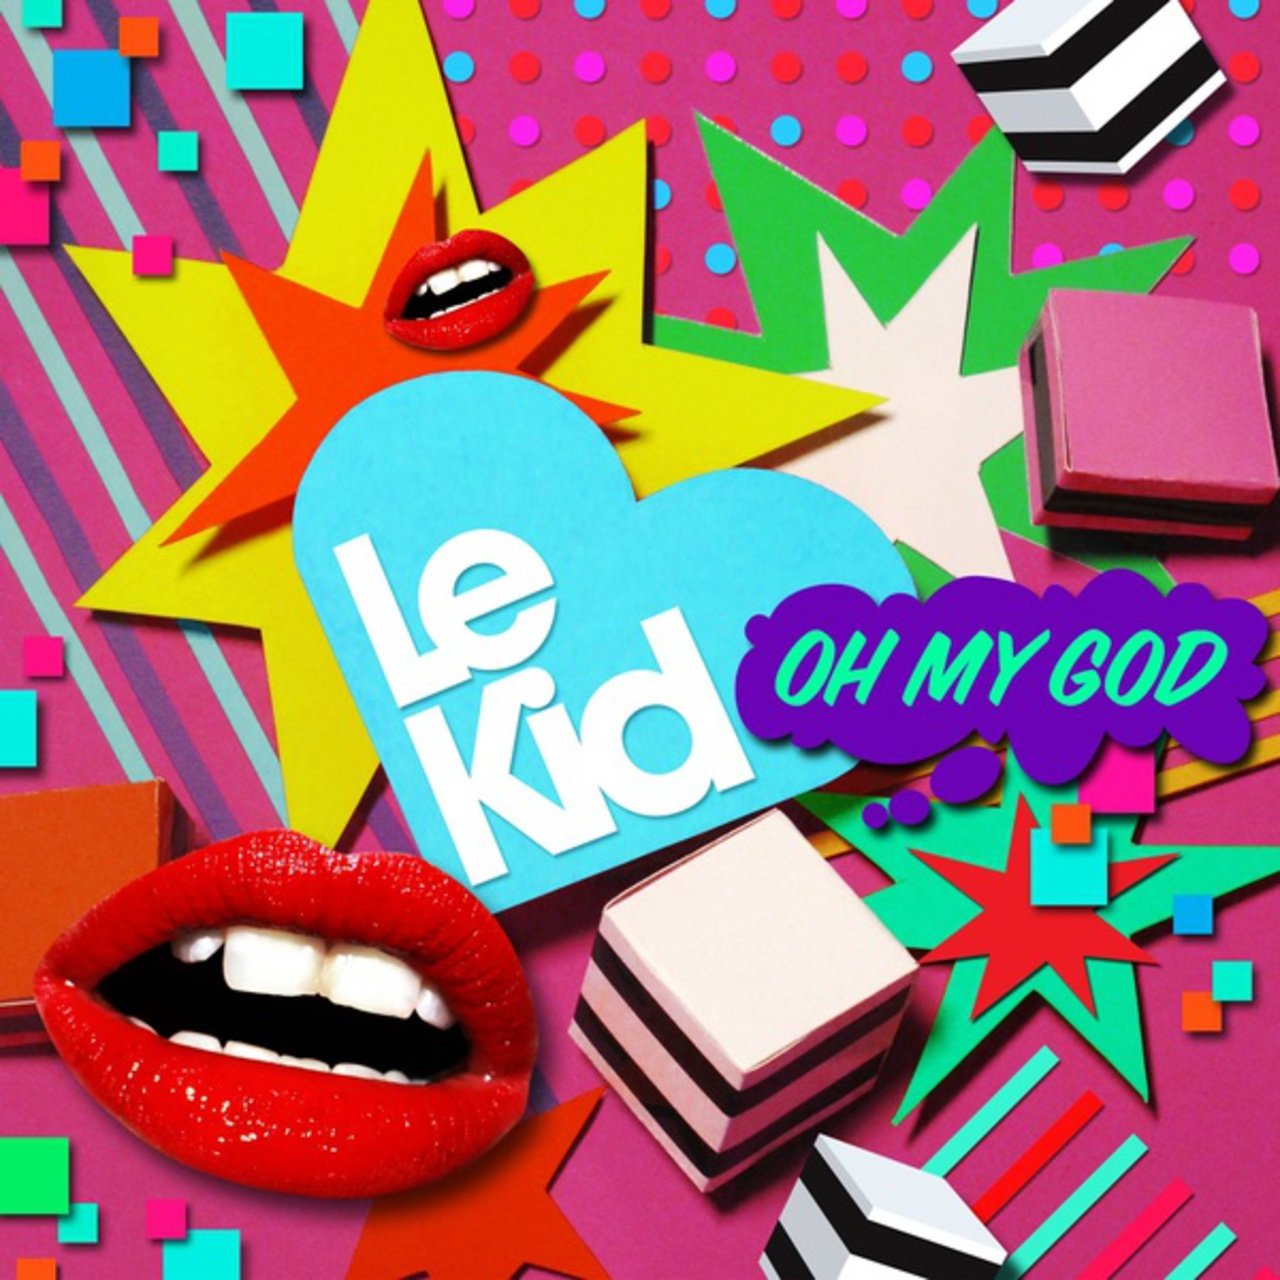 Le Kid — Oh My God cover artwork